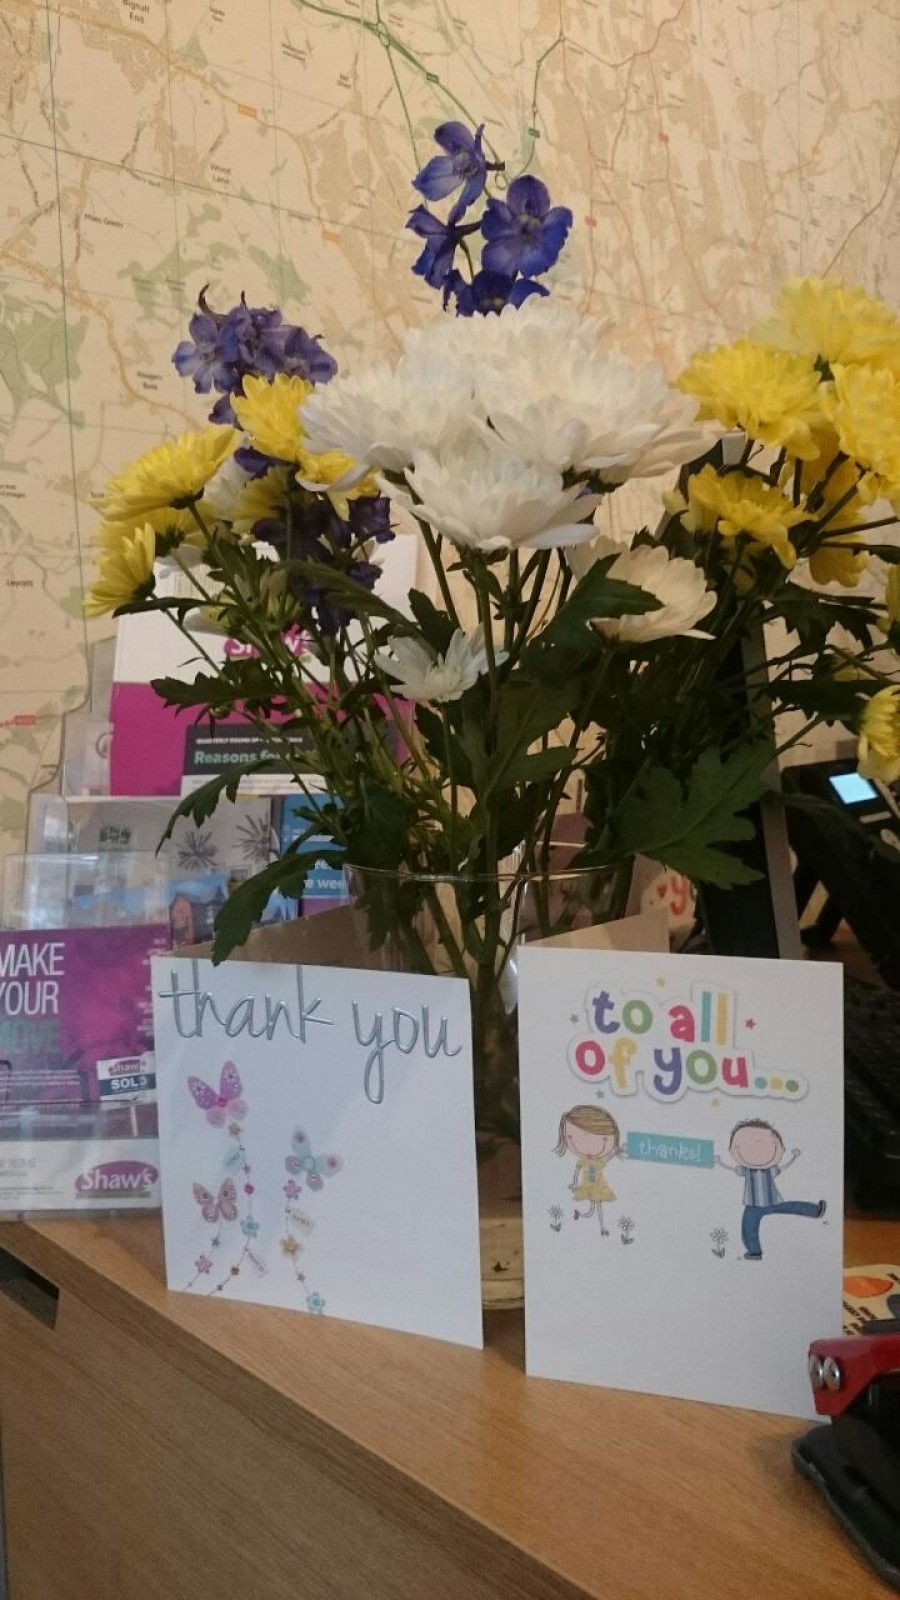 Flowers & thank you card